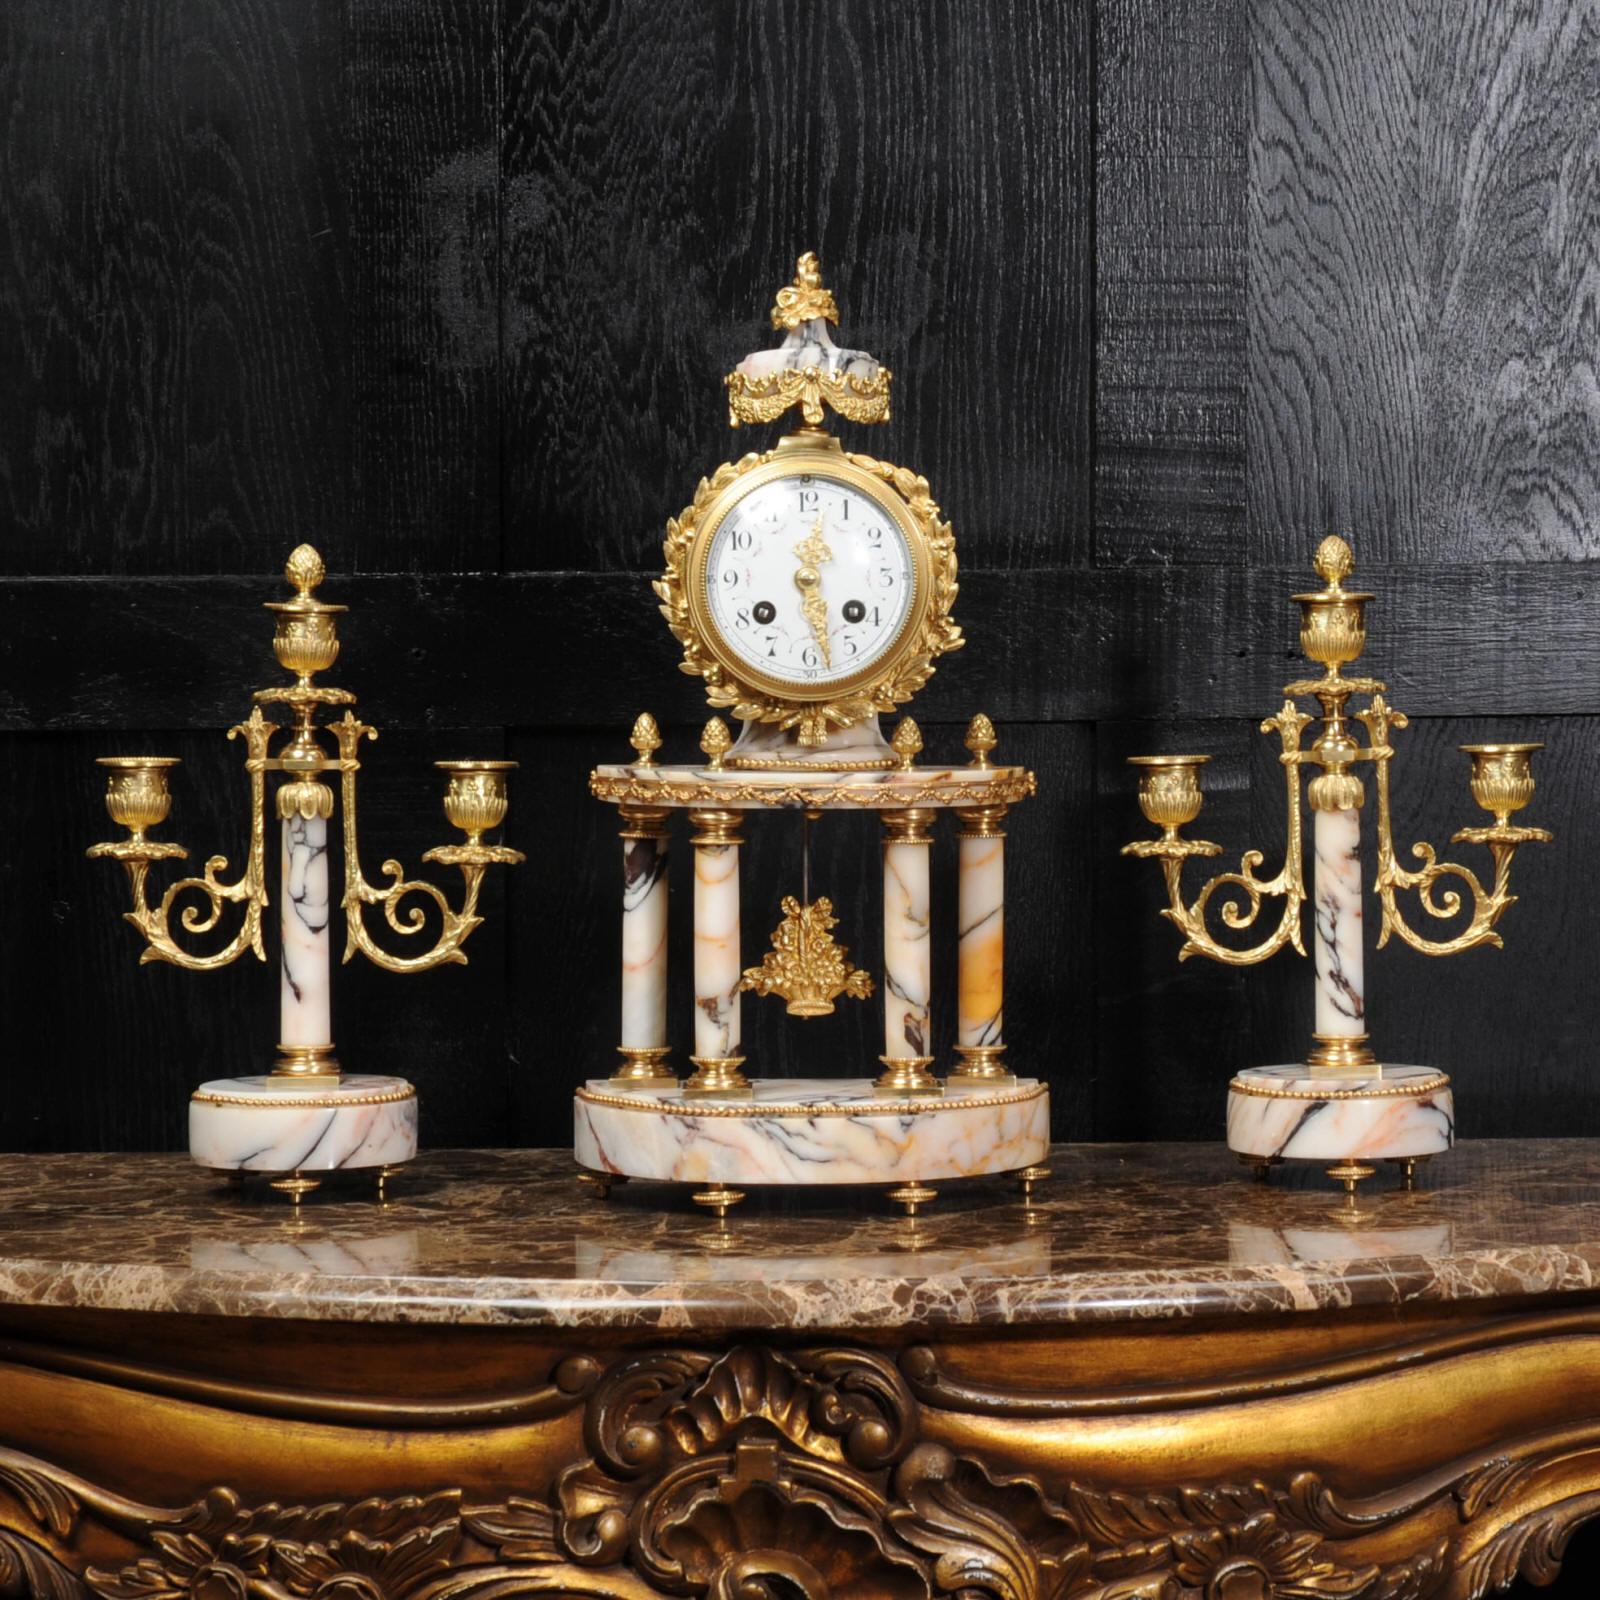 A superb original antique French clock set, fully overhauled and working, circa 1880. It is beautifully modelled in a stunning variegated specimen marble with salmon pink and silver grey veining. It is mounted with finely finished ormolu (gilded